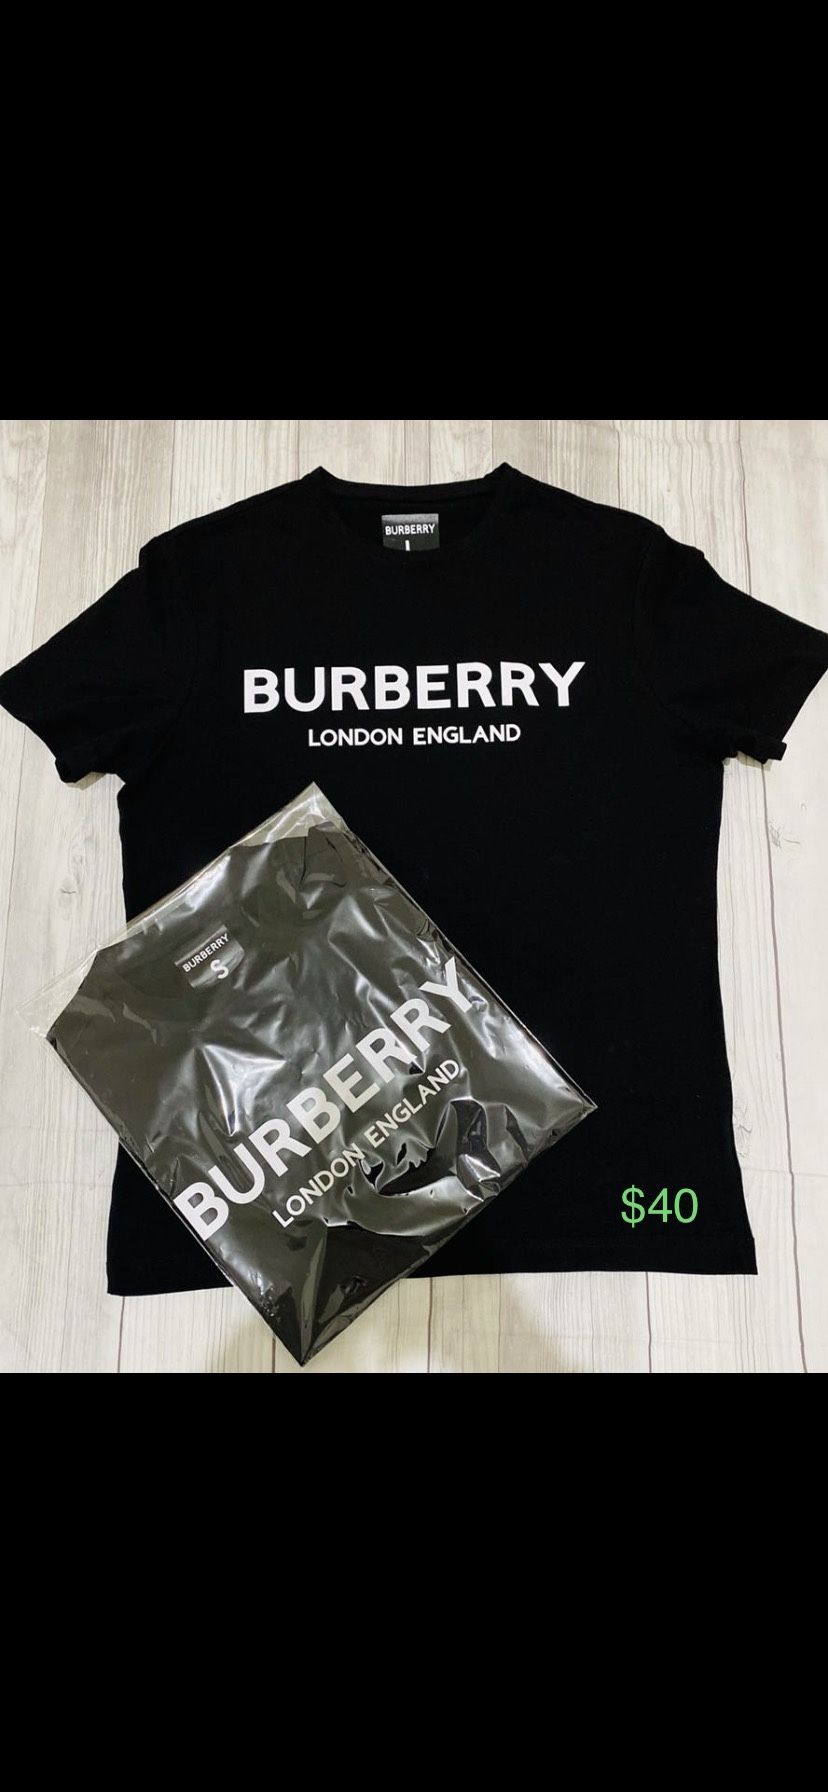 Burberry T-shirt In Black And White 